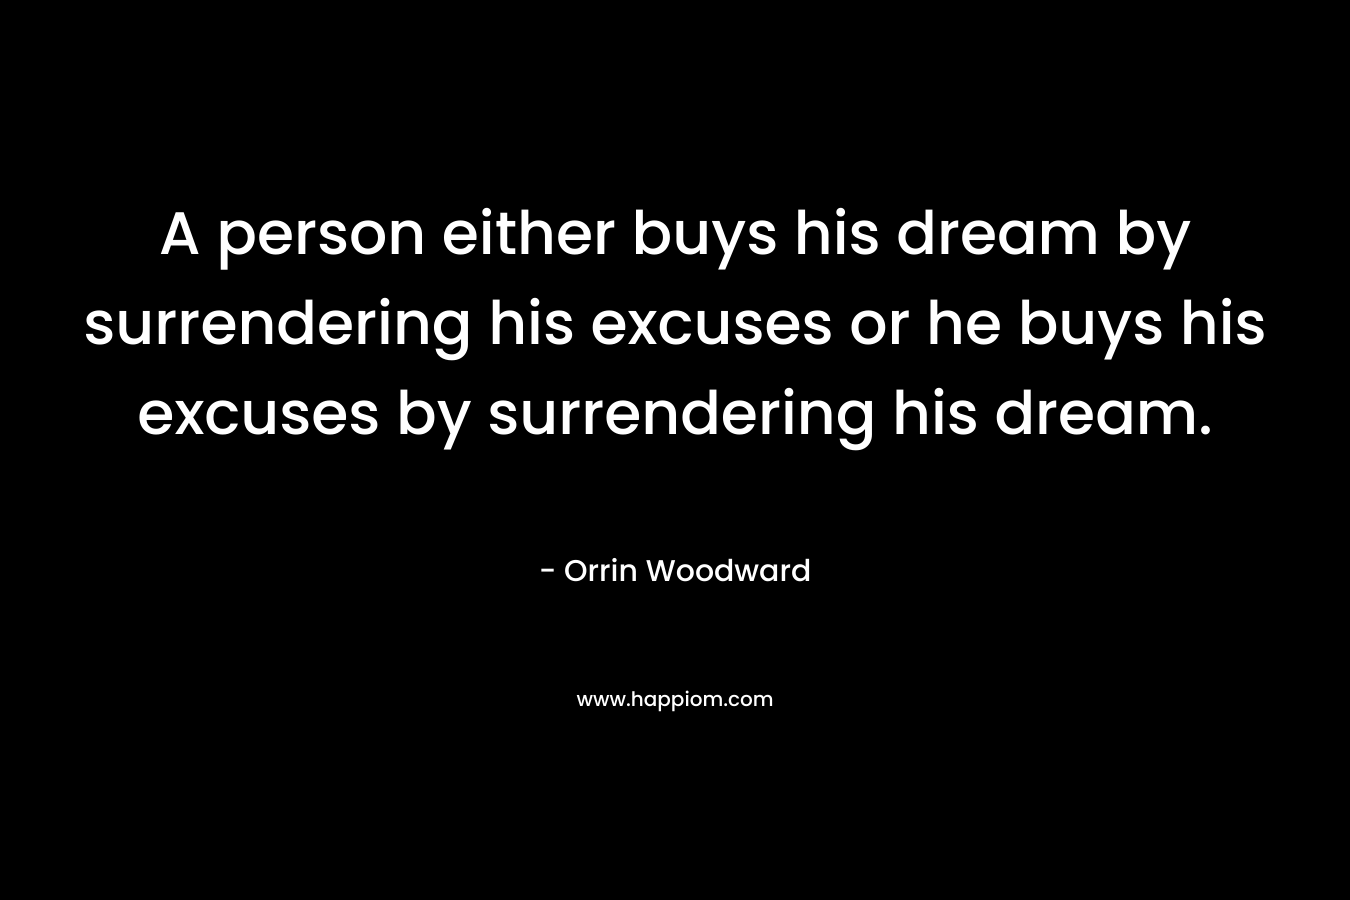 A person either buys his dream by surrendering his excuses or he buys his excuses by surrendering his dream.